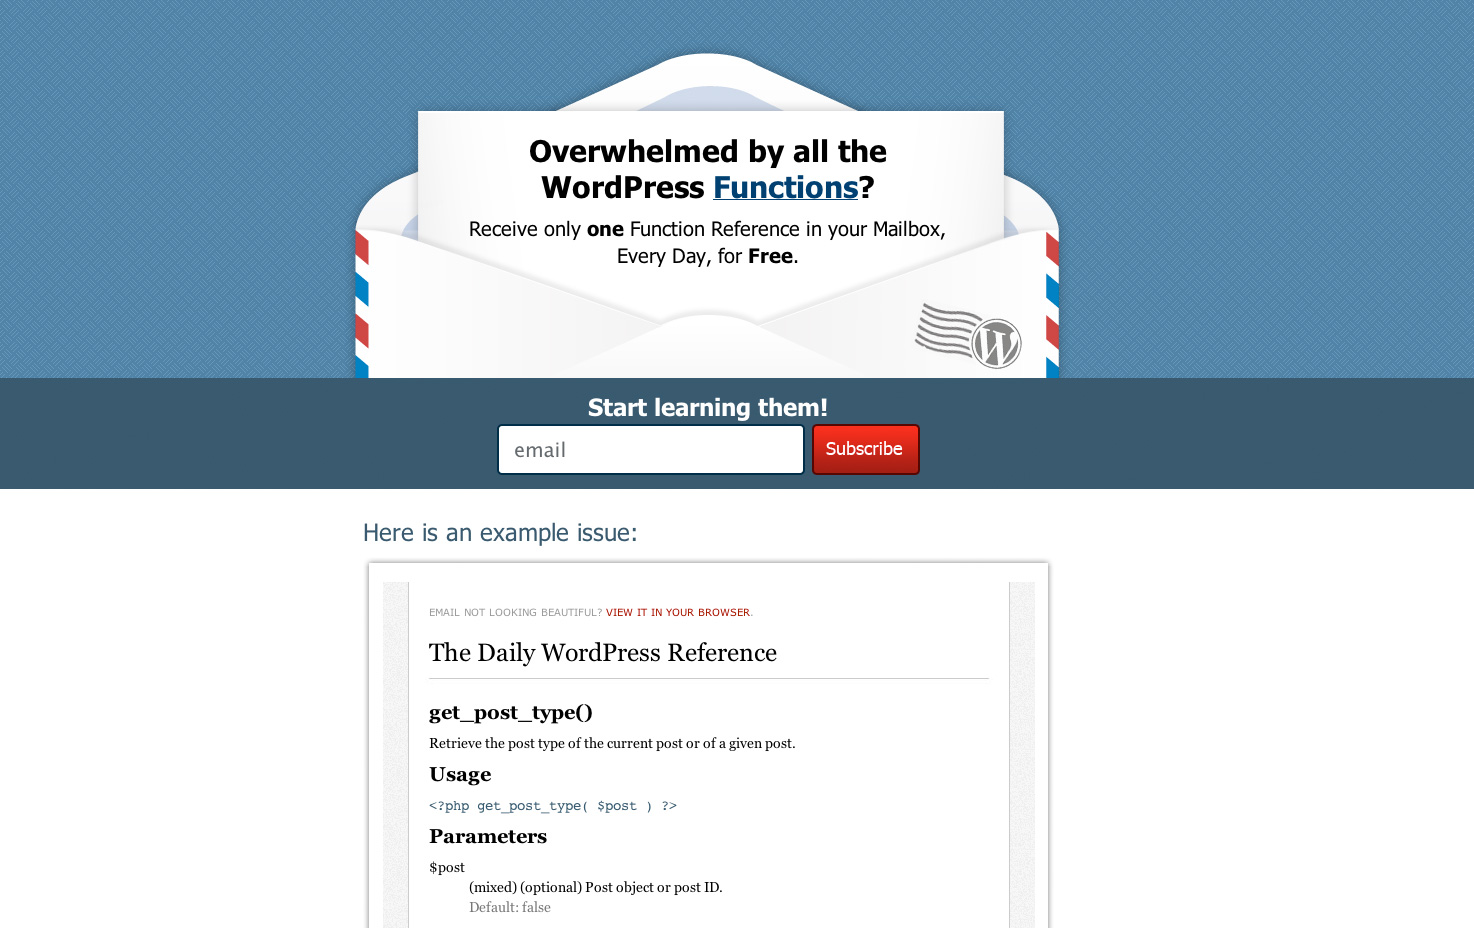 The Daily WordPress Reference